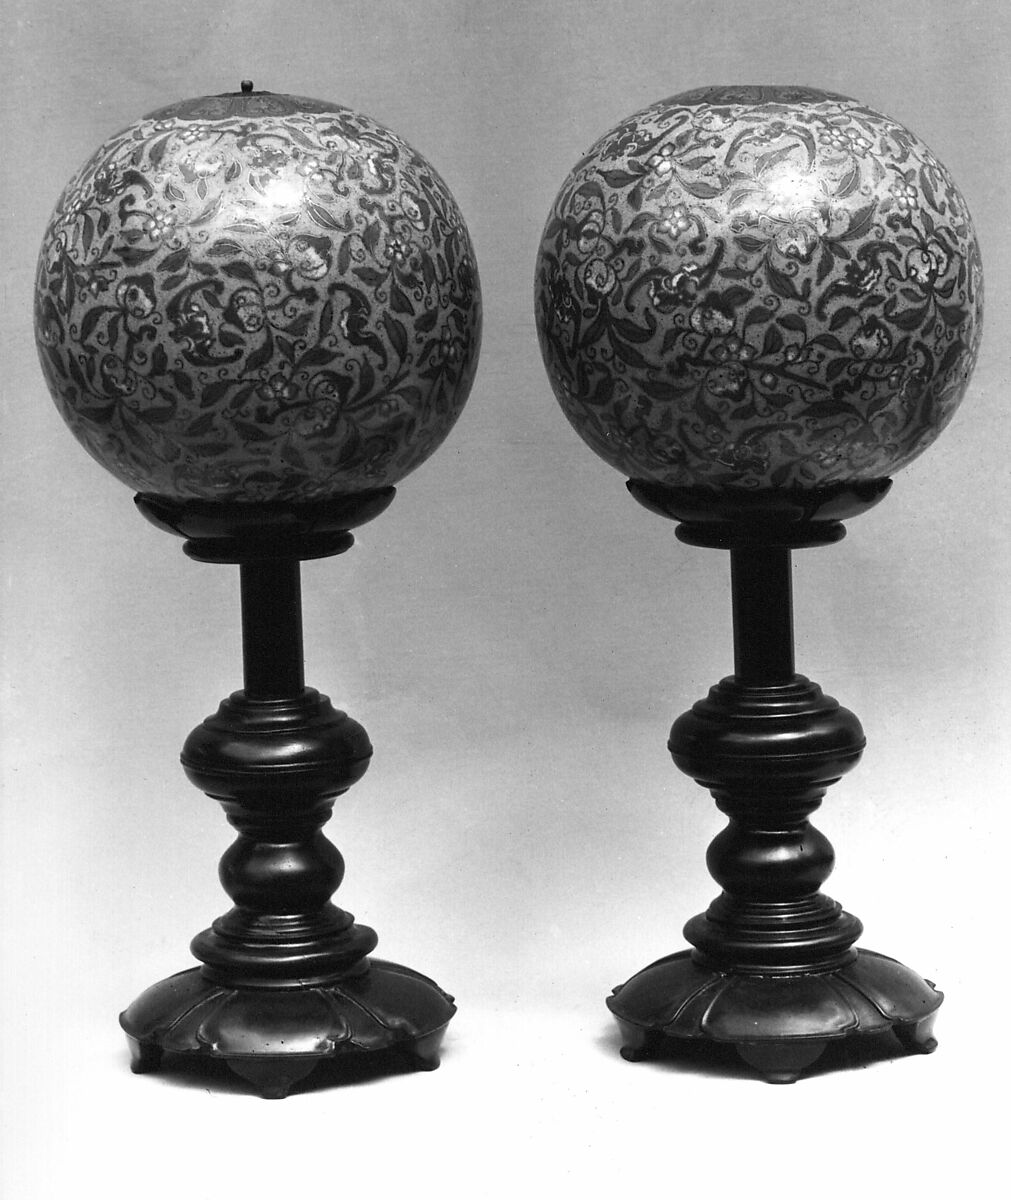 Hat Stand (One of a Pair), Cloisonné enamel tops on wood bases, China 